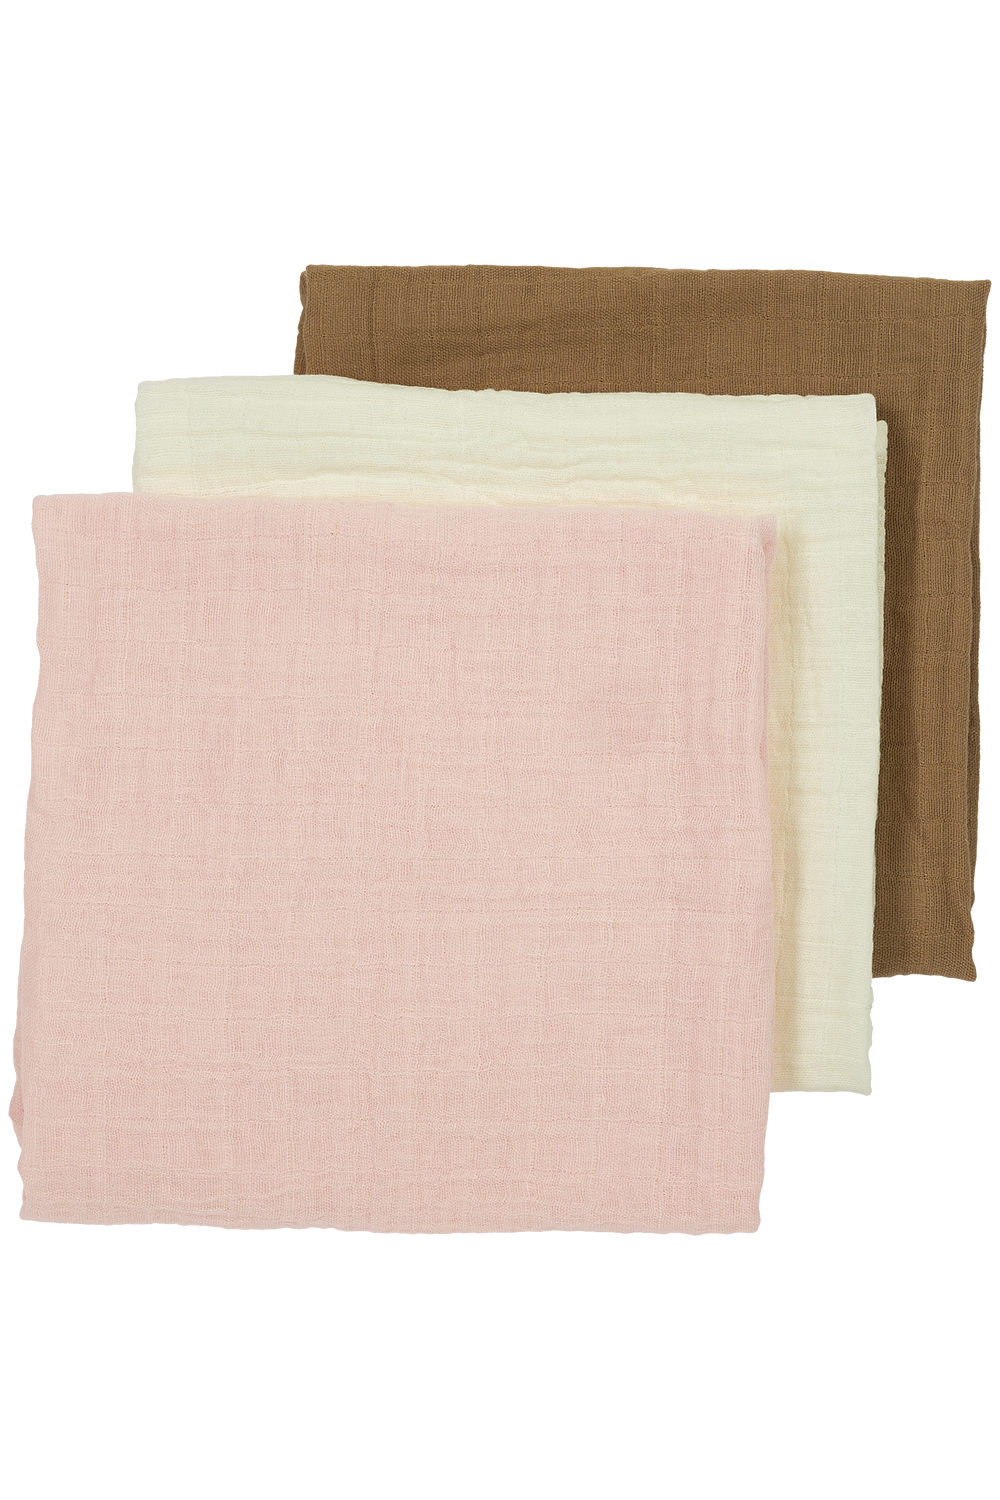 Pre-washed Musselin Mullwindeln 3er pack Uni - offwhite/soft pink/toffee - 70x70cm